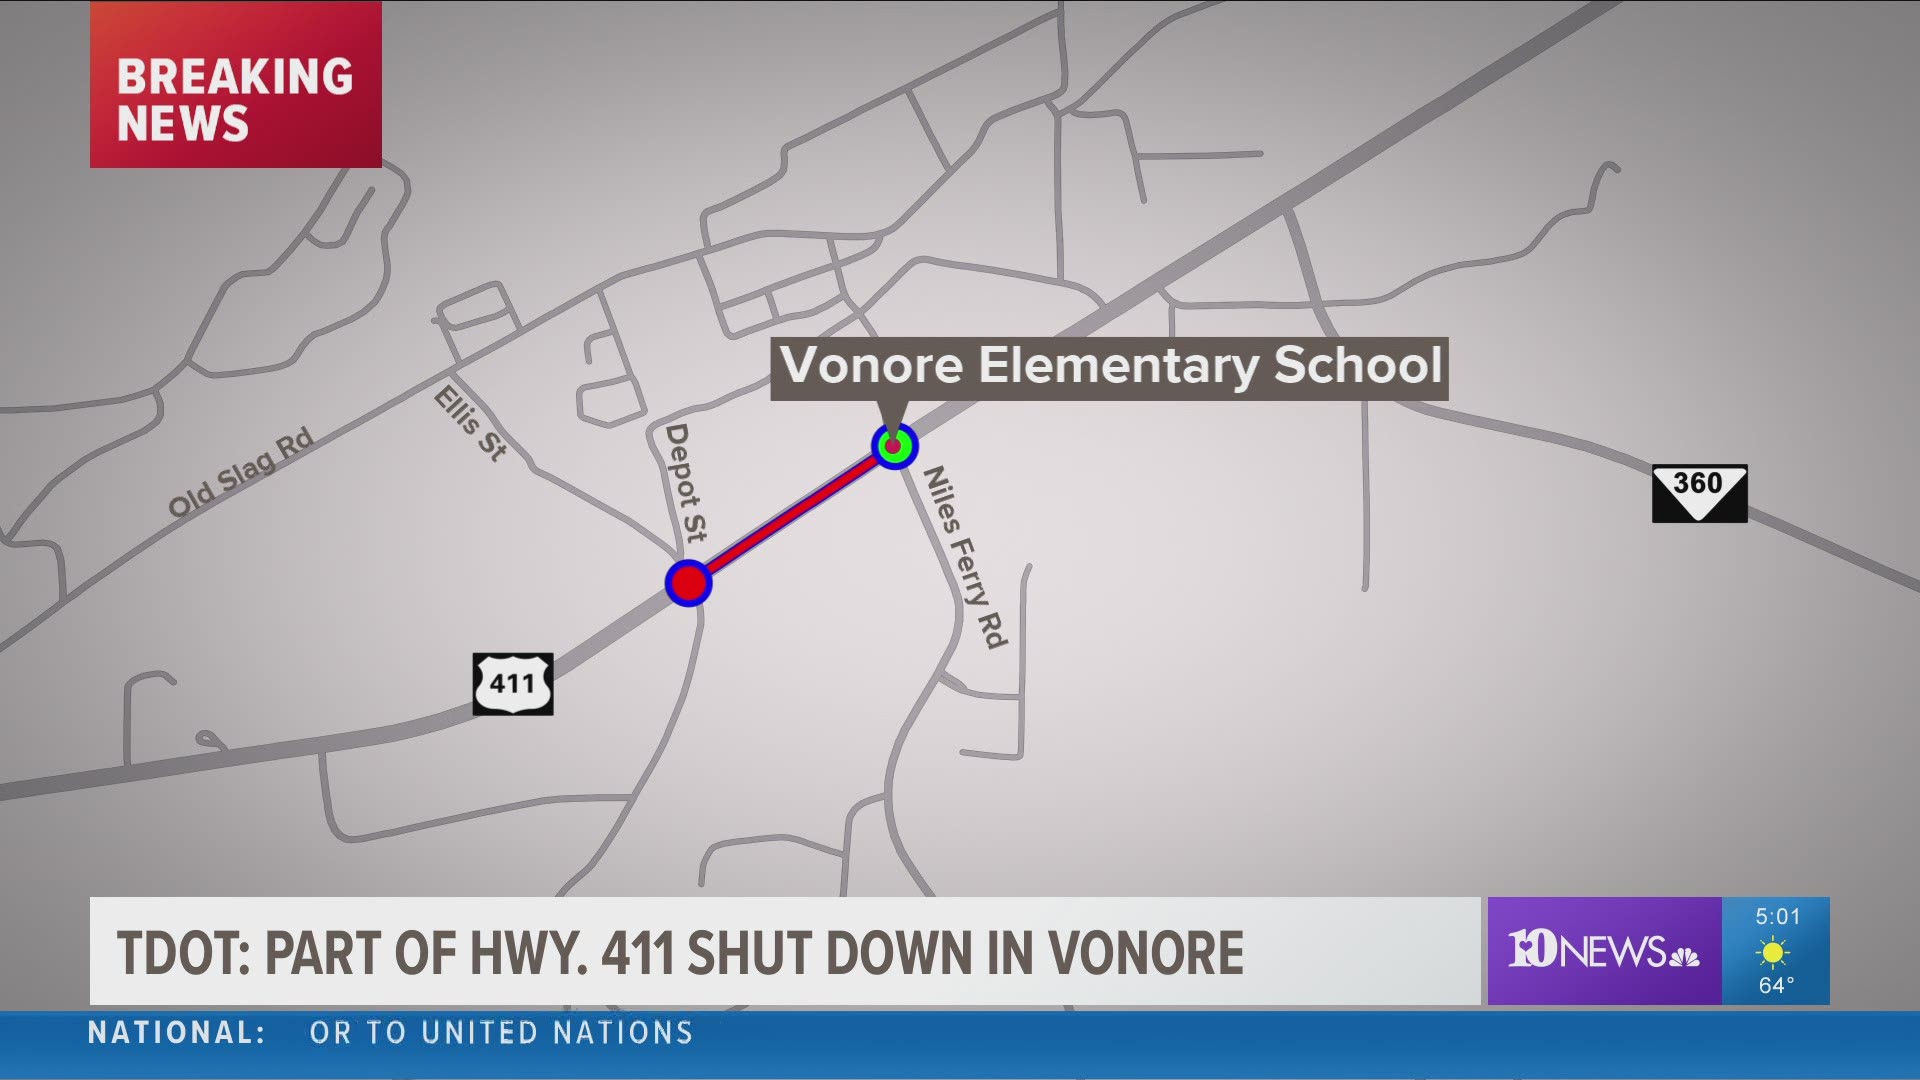 TDOT reports that part of Highway 411 was shut down Friday evening in Vonore.